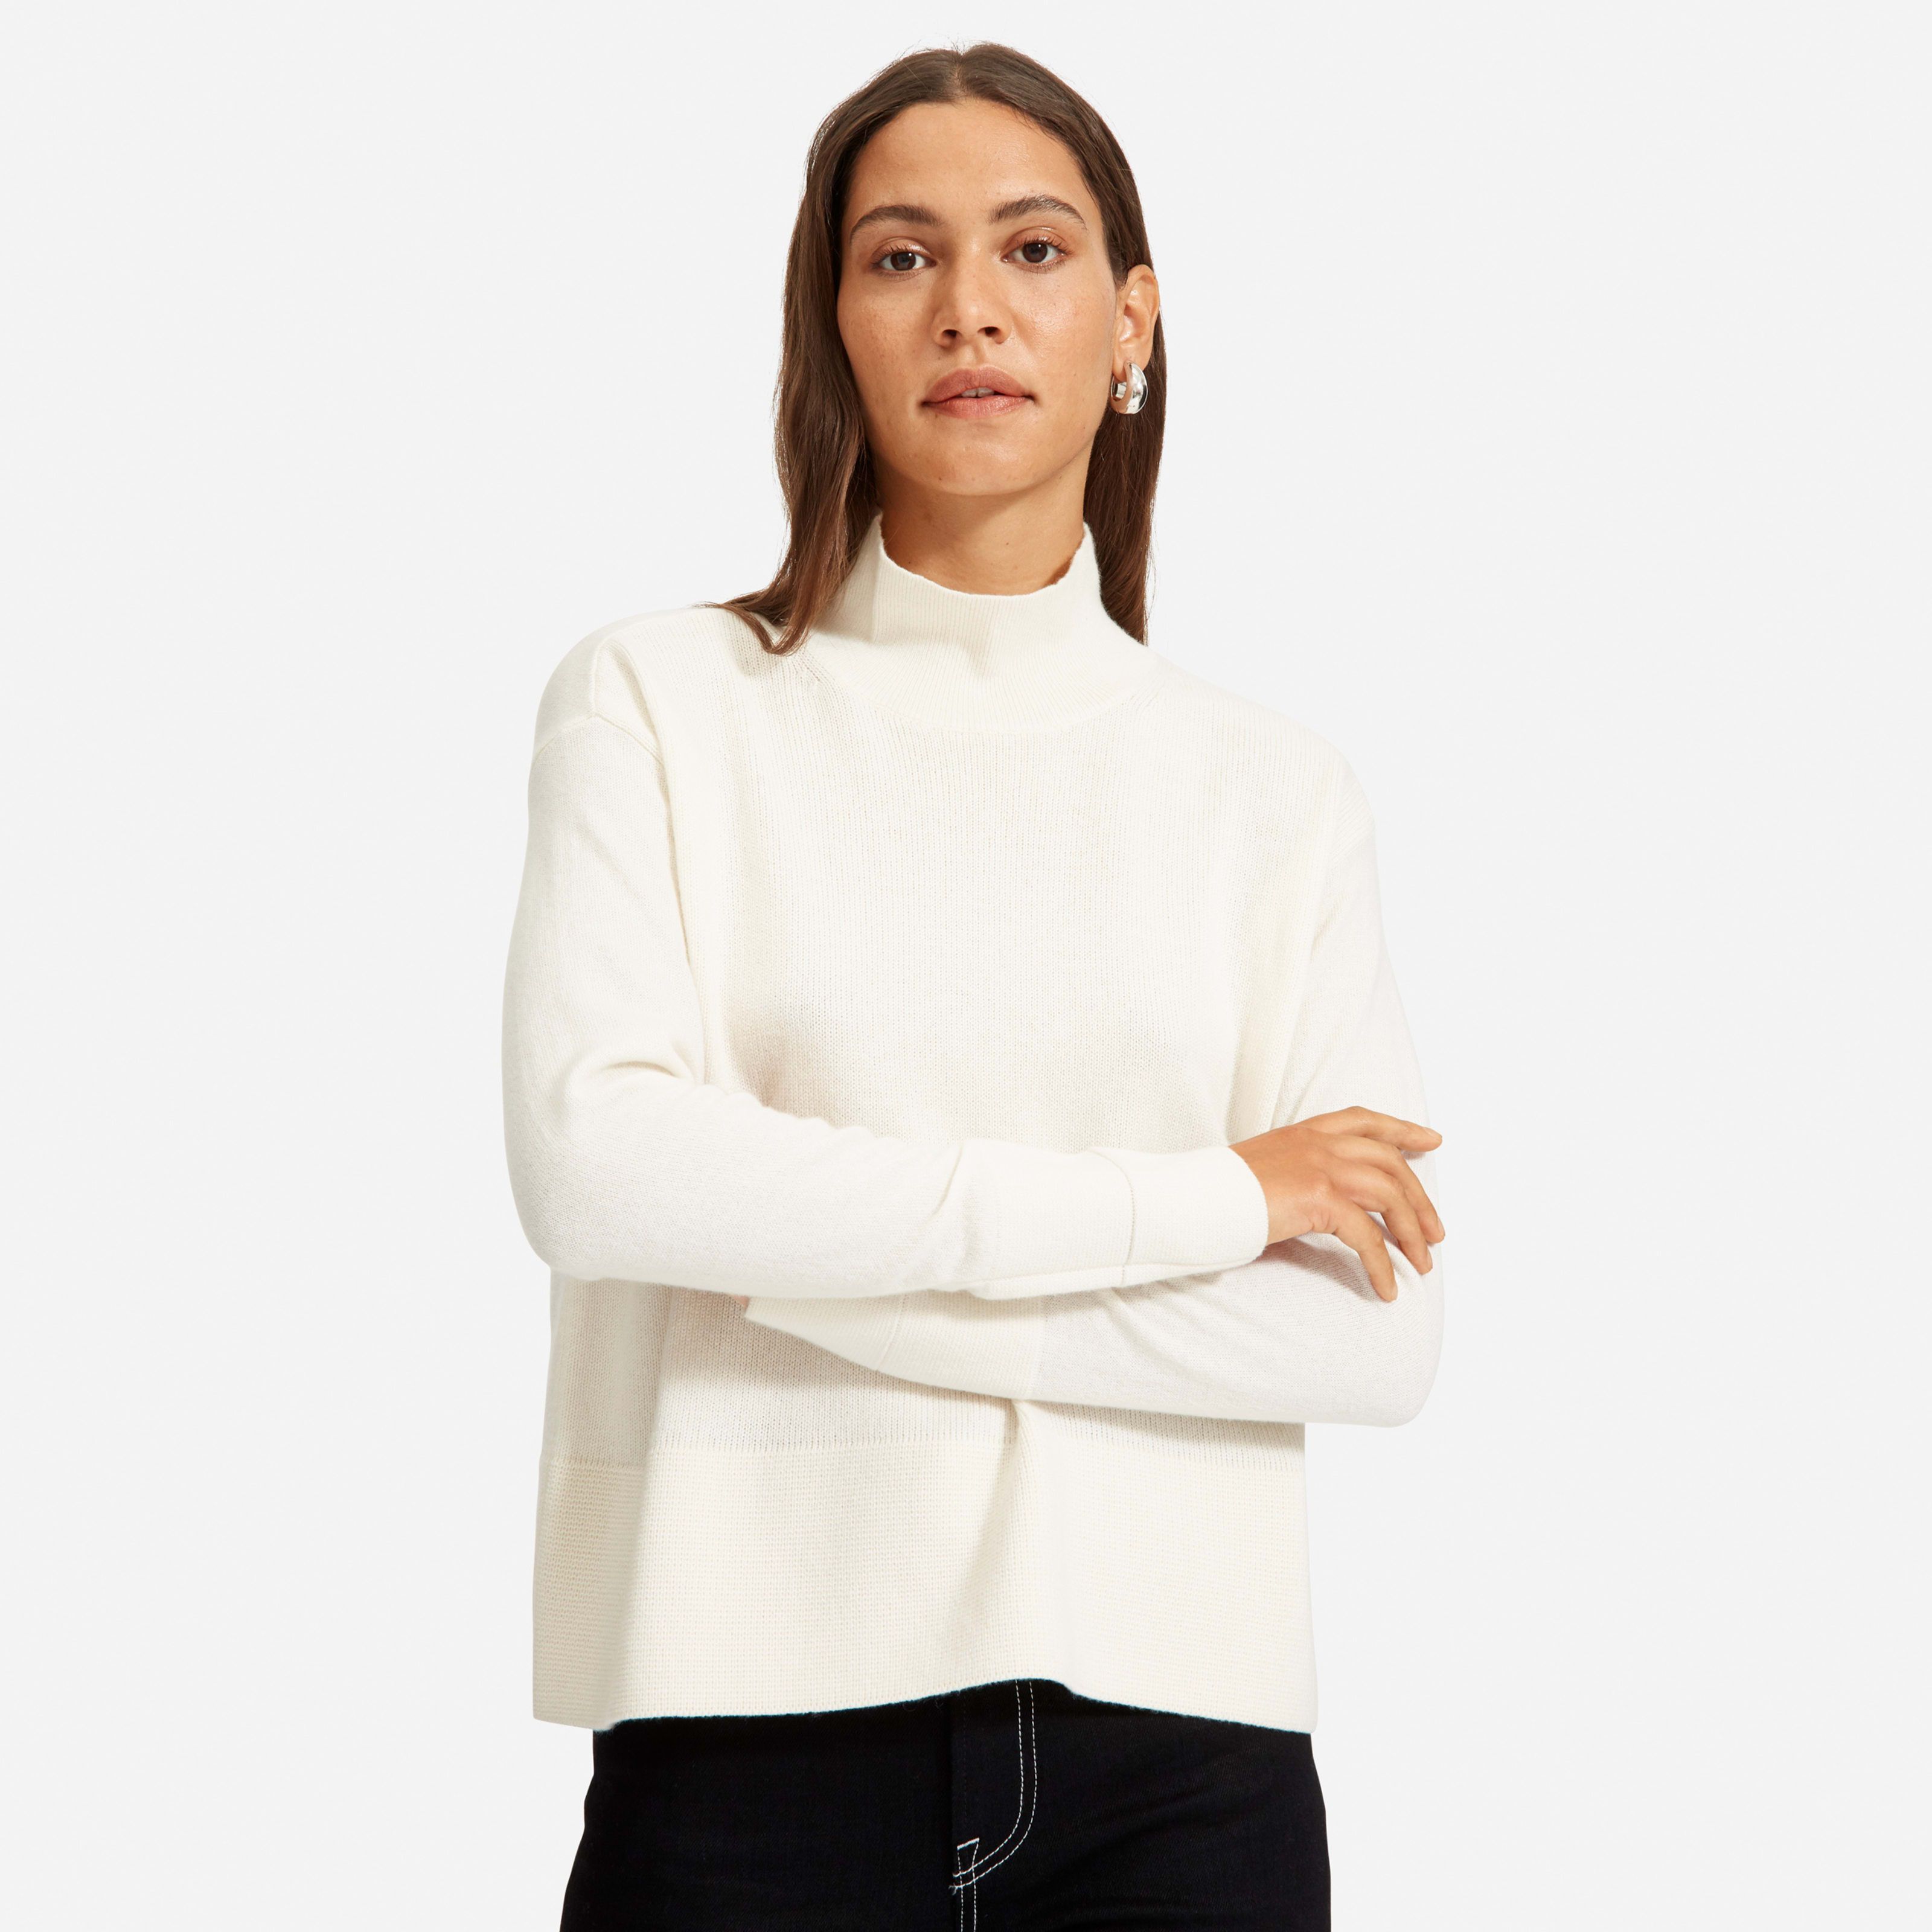 Women's Cashmere Square Turtleneck Sweater by Everlane in Ivory, Size XS | Everlane